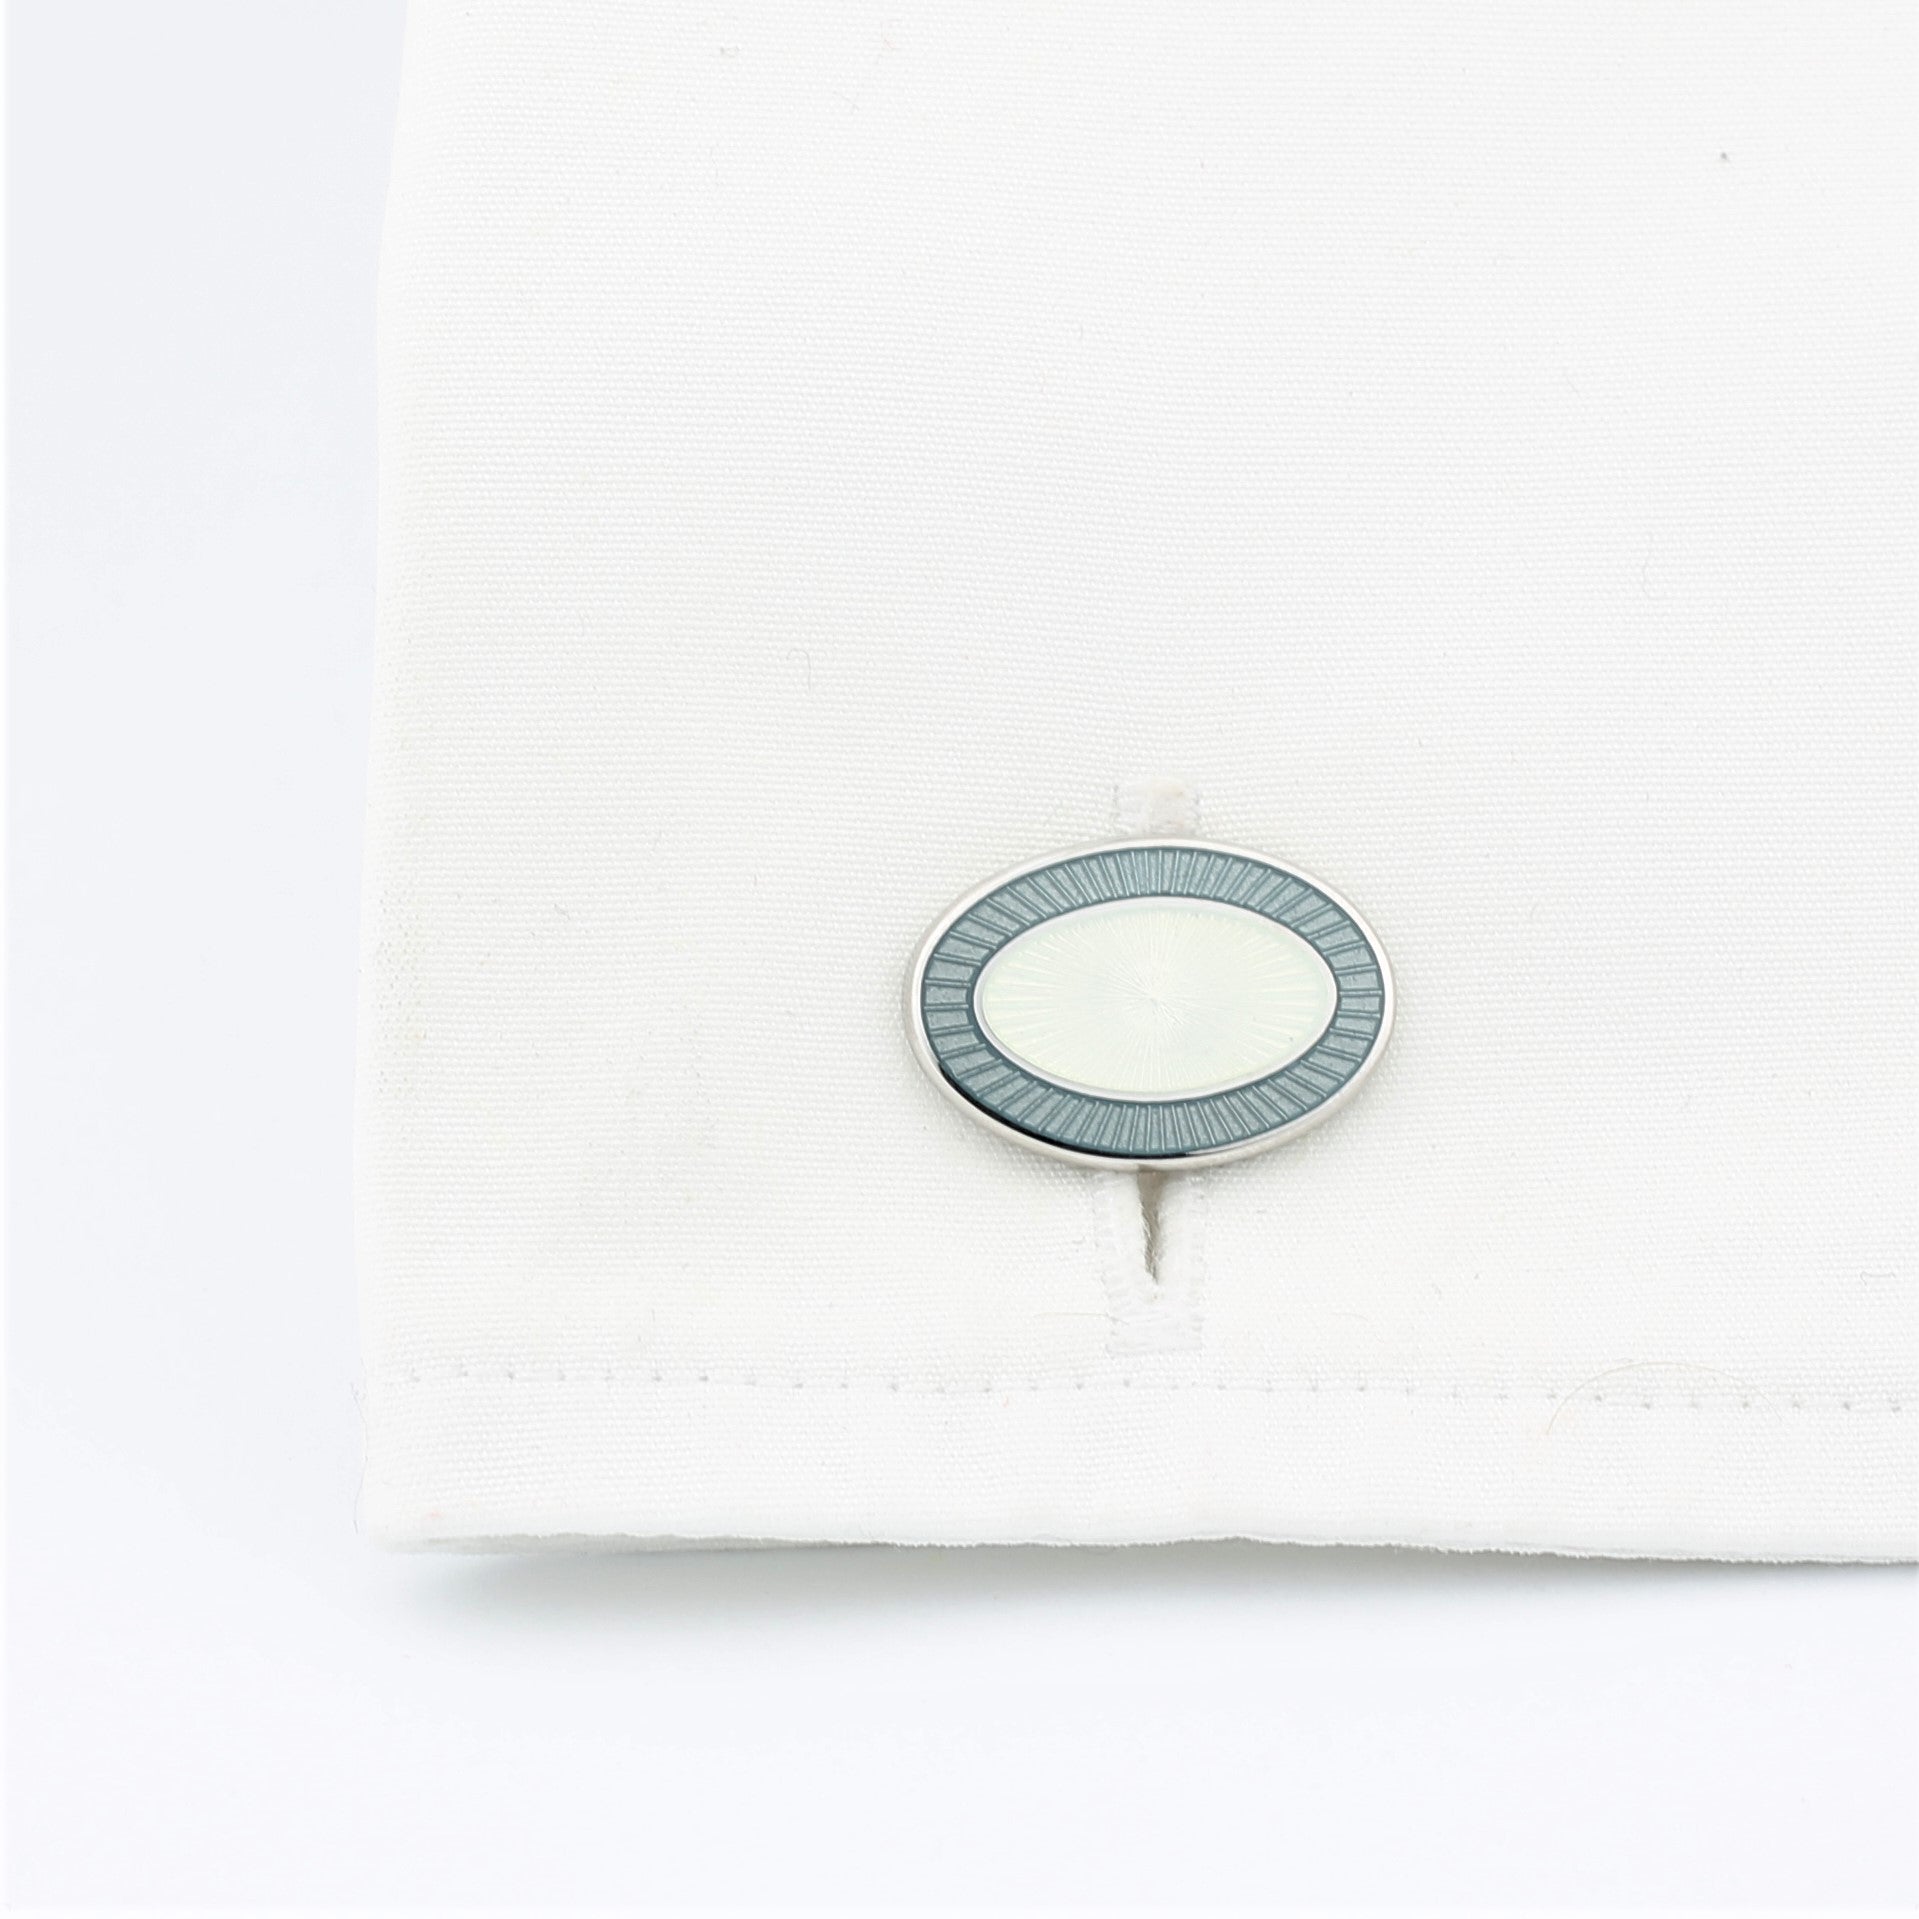 Double oval grey and white cufflinks in enamel on sterling silver in a cuff